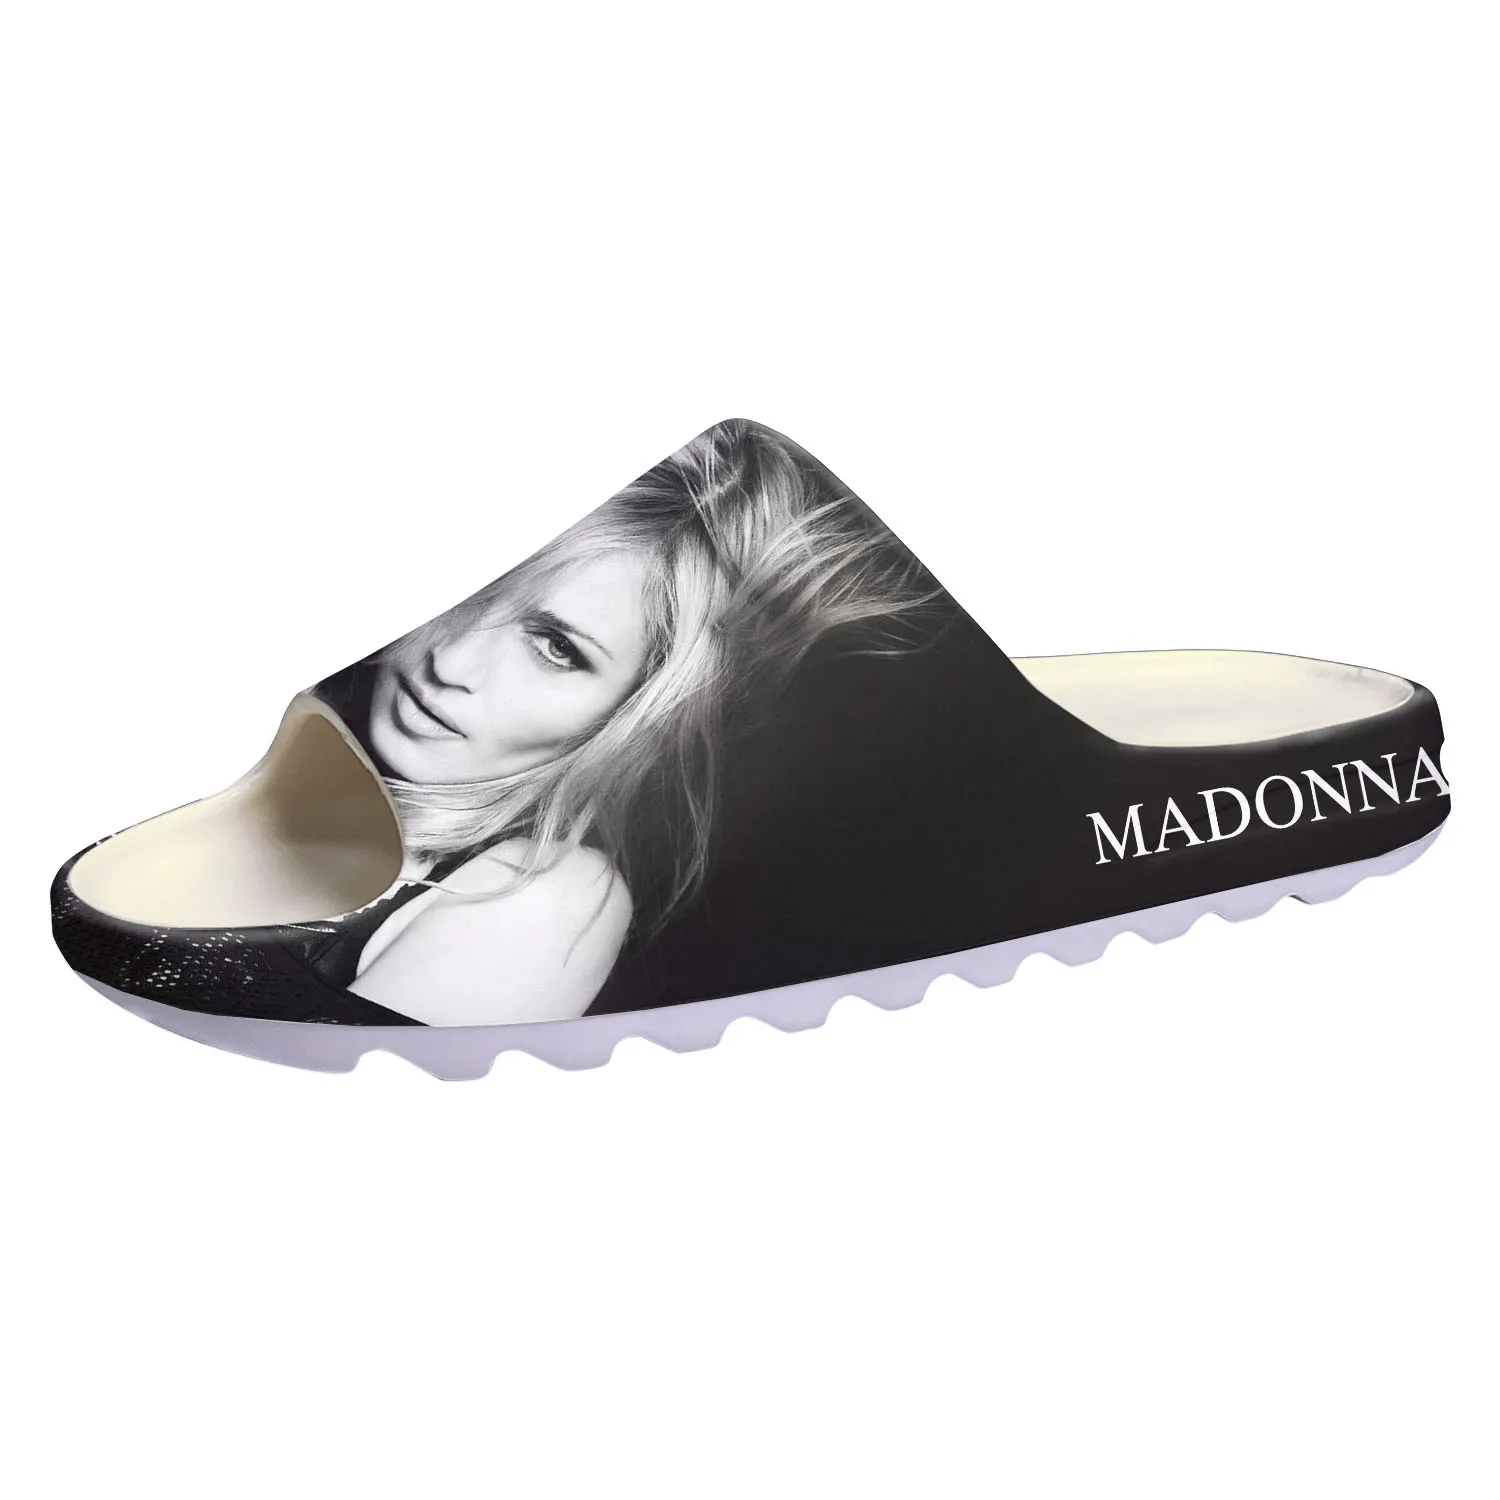 

Madonna Rock Singer Disco Music Soft Sole Sllipers Home Clogs Water Shoes Mens Womens Teenager Beach Customize on Shit Sandals